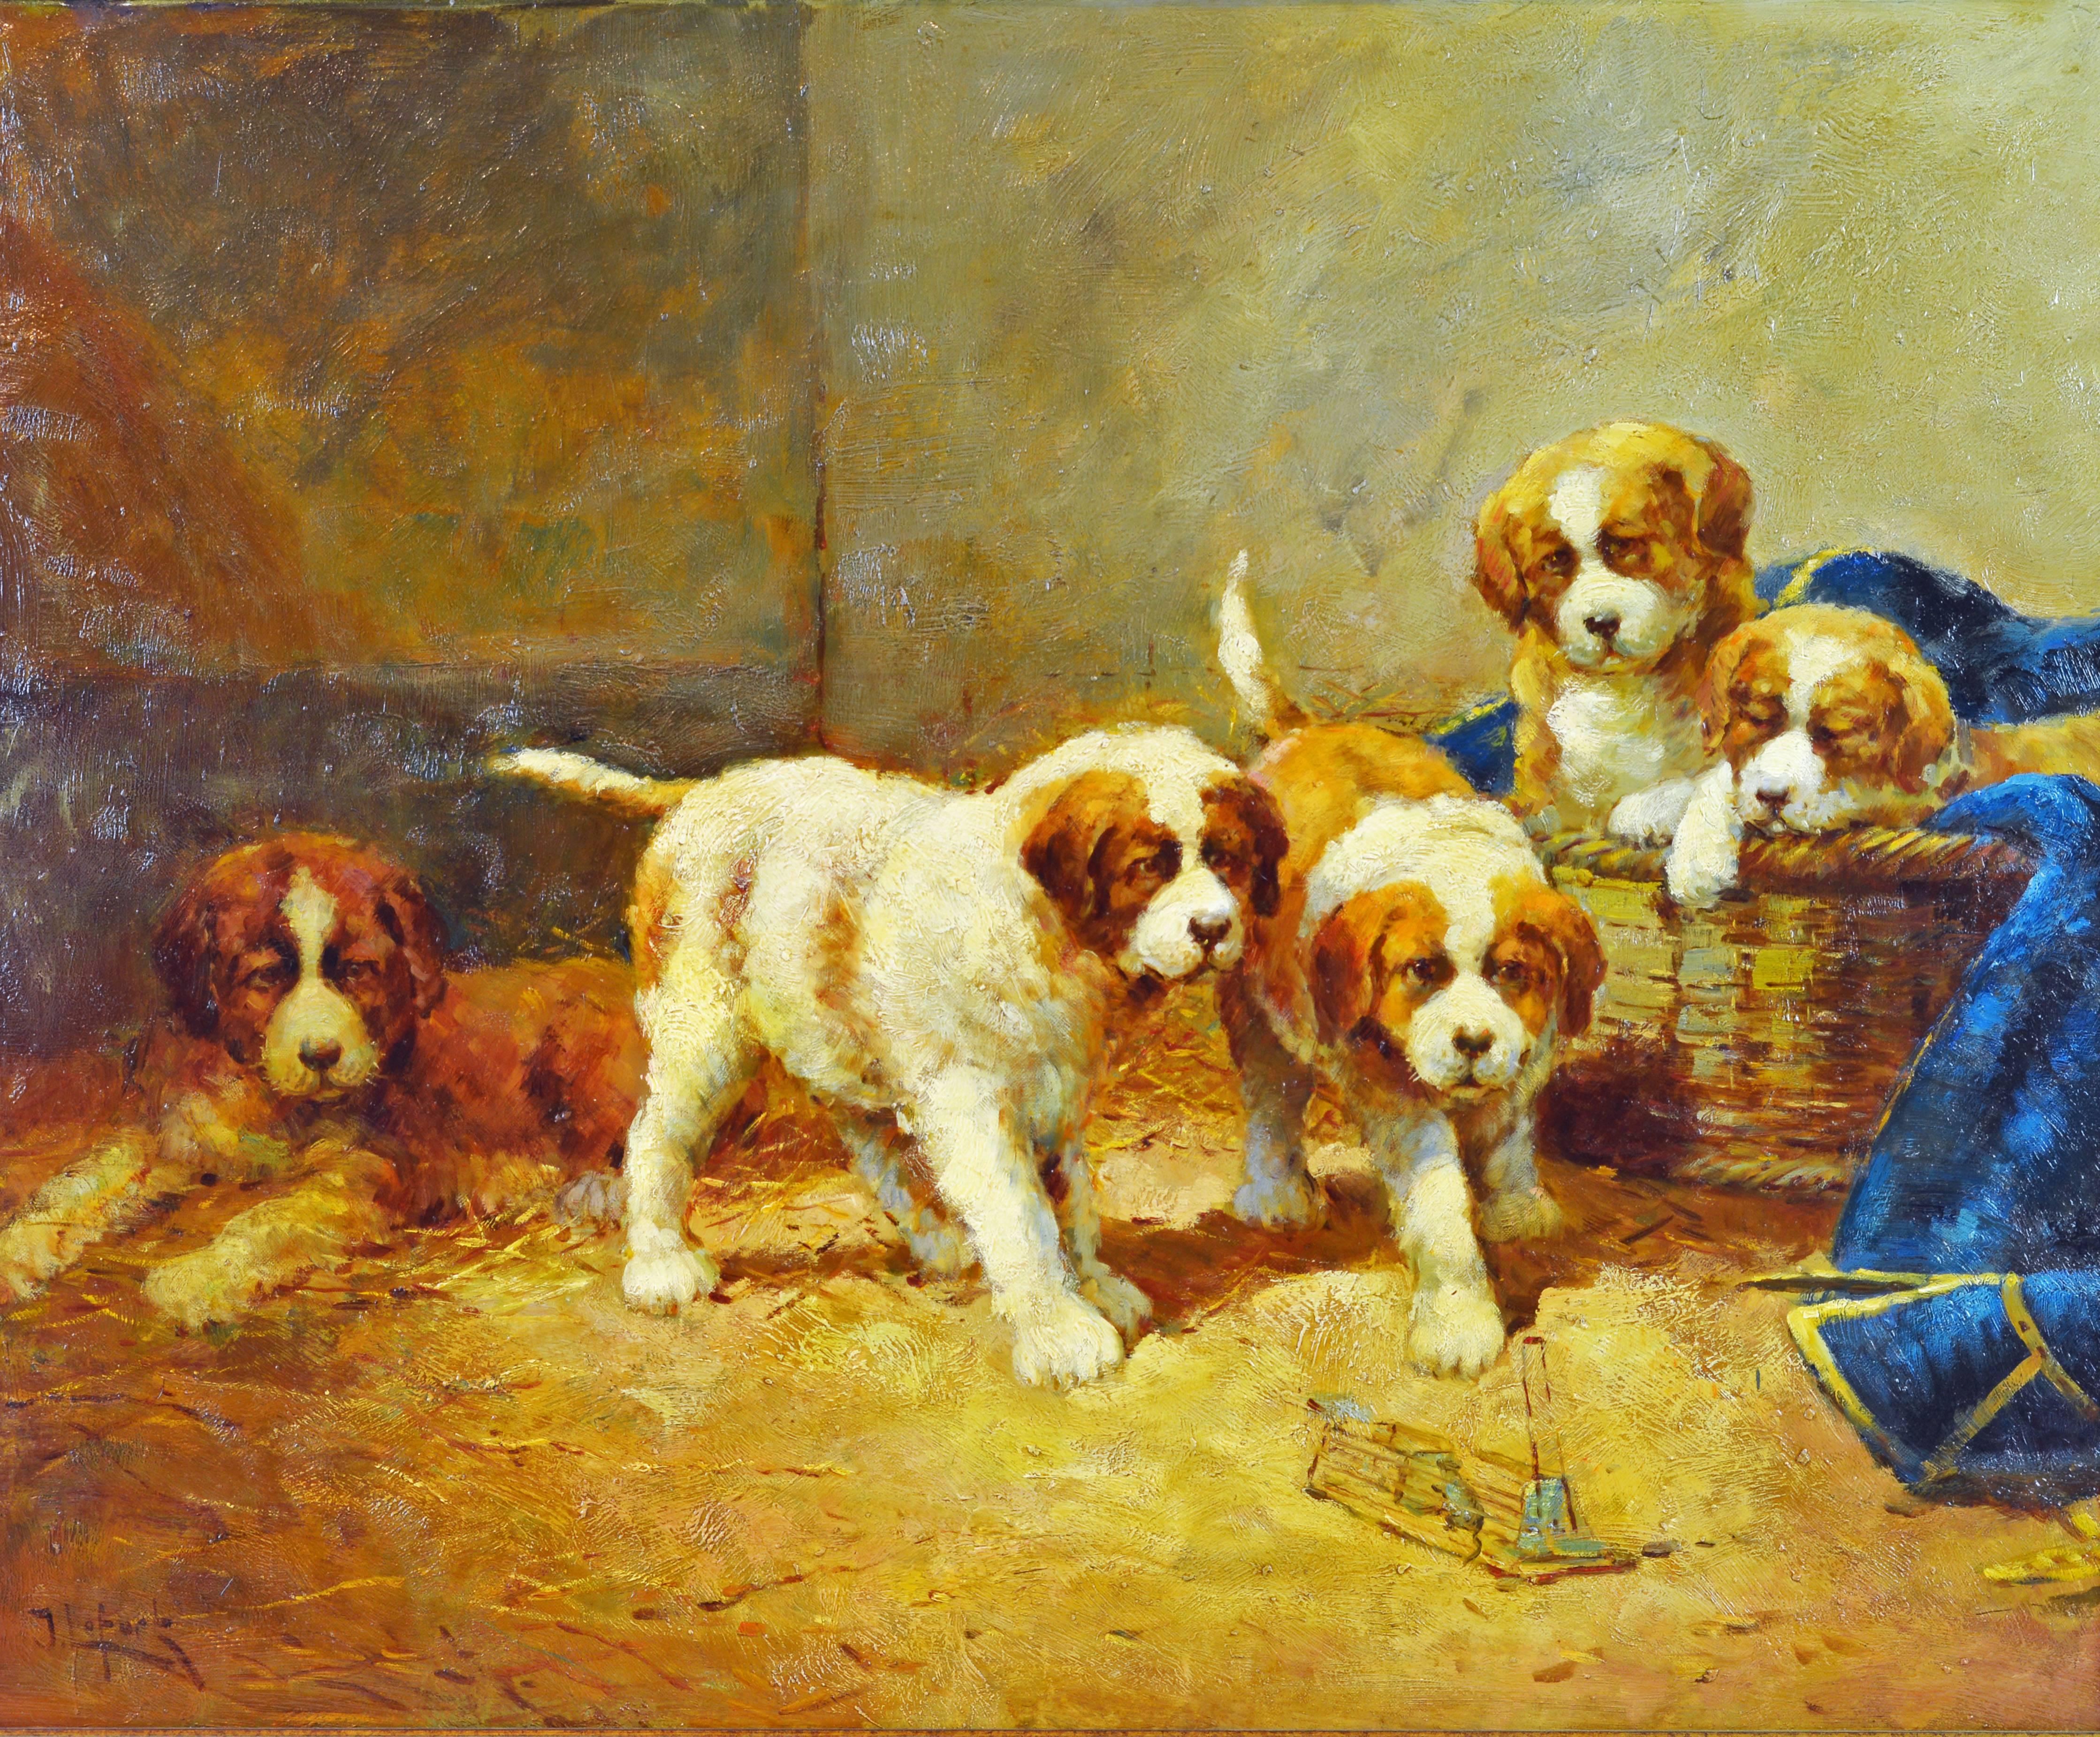 This large work by Jean Lefort (French b. 1947) features a family of 5 St. Bernard puppies grouped around a mouse trap. It is oil on oil on canvas measuring 28 x 35 inches without frame and 33.5 x 40 inches including the ornate Dutch frame. Signed